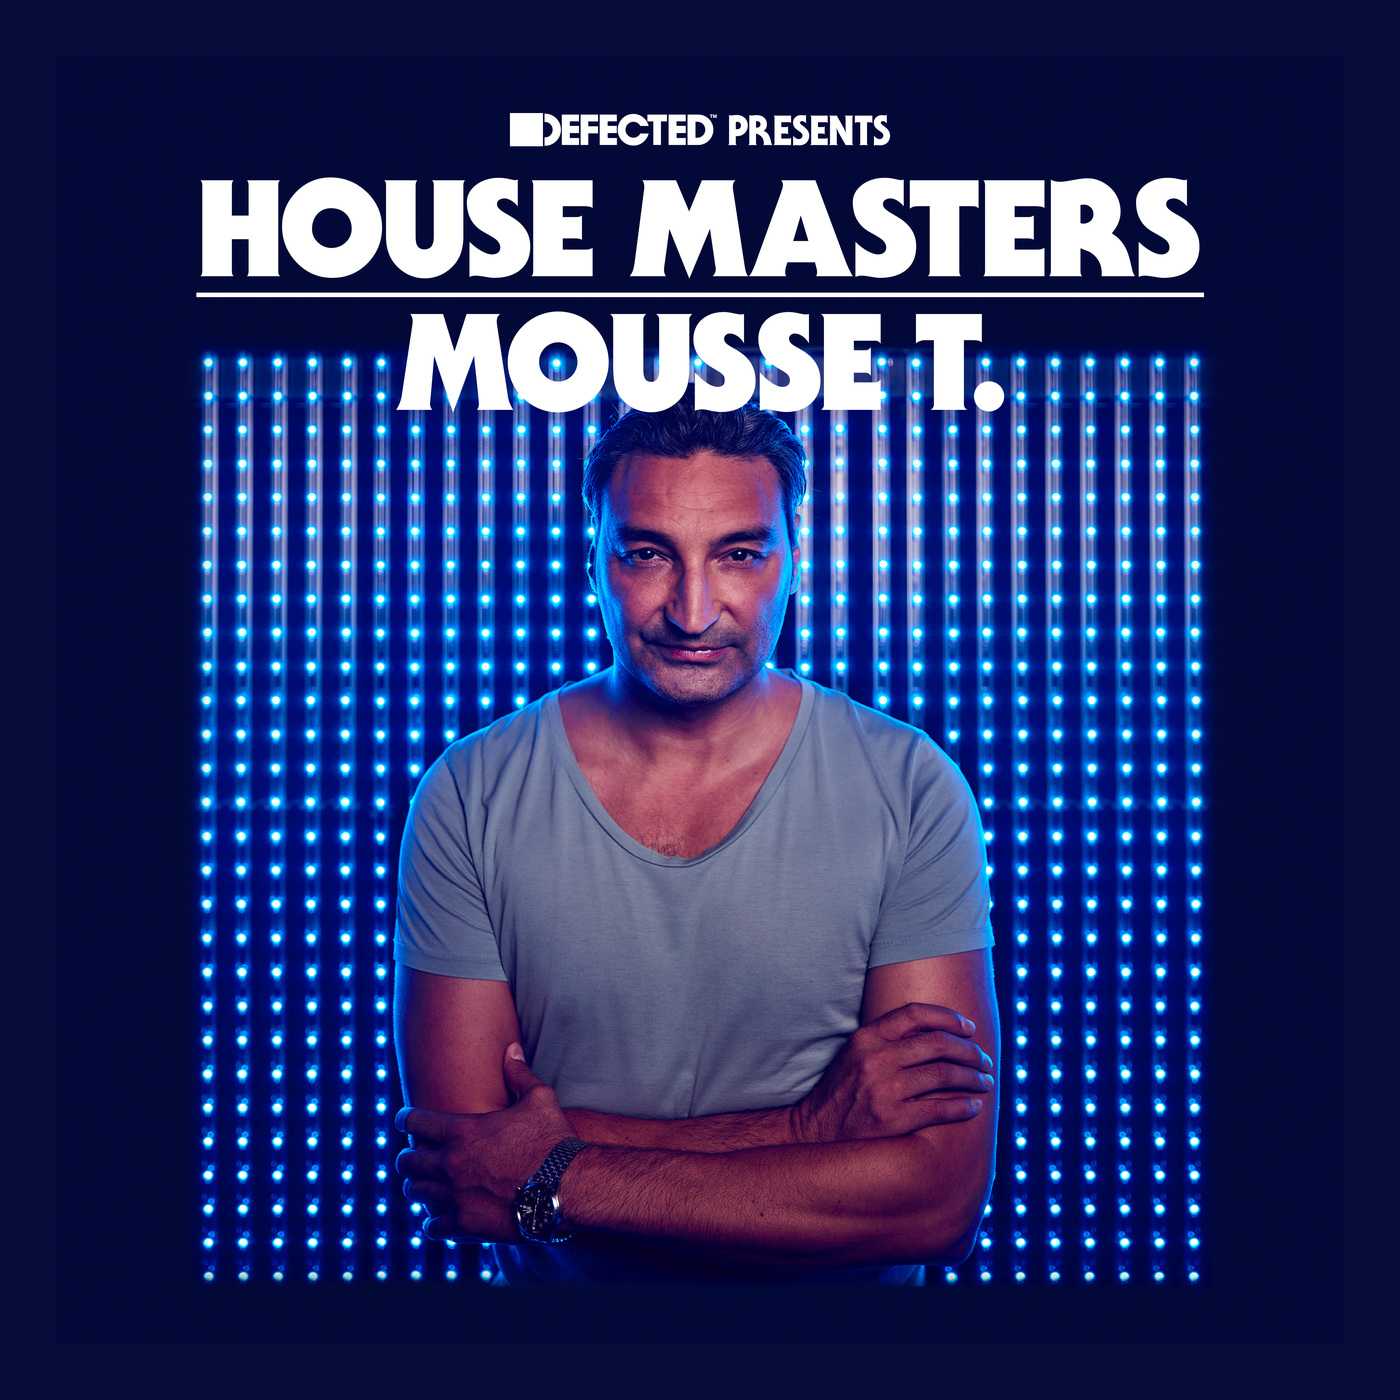 VA - Defected Presents House Masters - Mousse T. / Defected